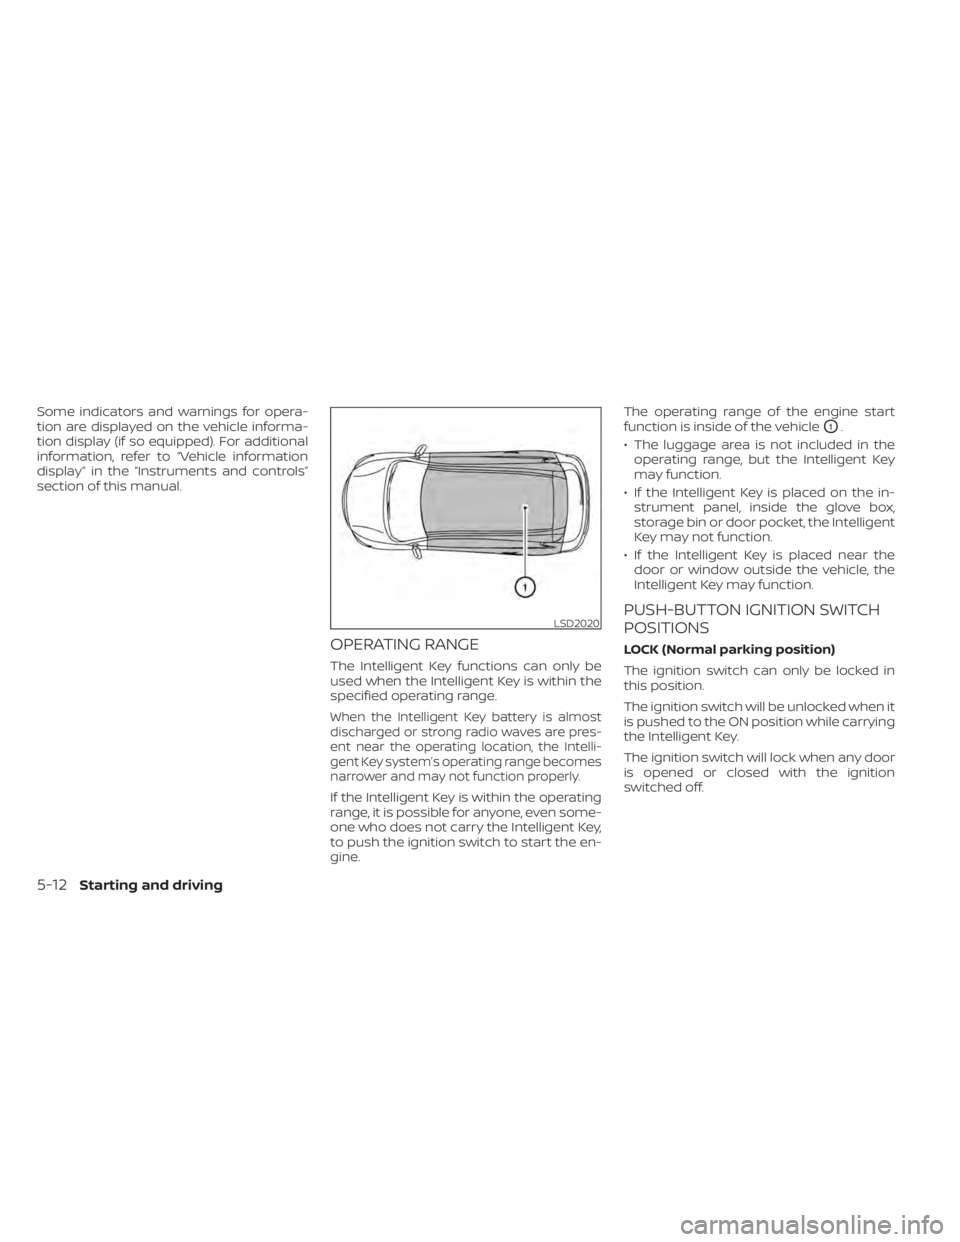 NISSAN KICKS 2021 Repair Manual Some indicators and warnings for opera-
tion are displayed on the vehicle informa-
tion display (if so equipped). For additional
information, refer to “Vehicle information
display” in the “Instr